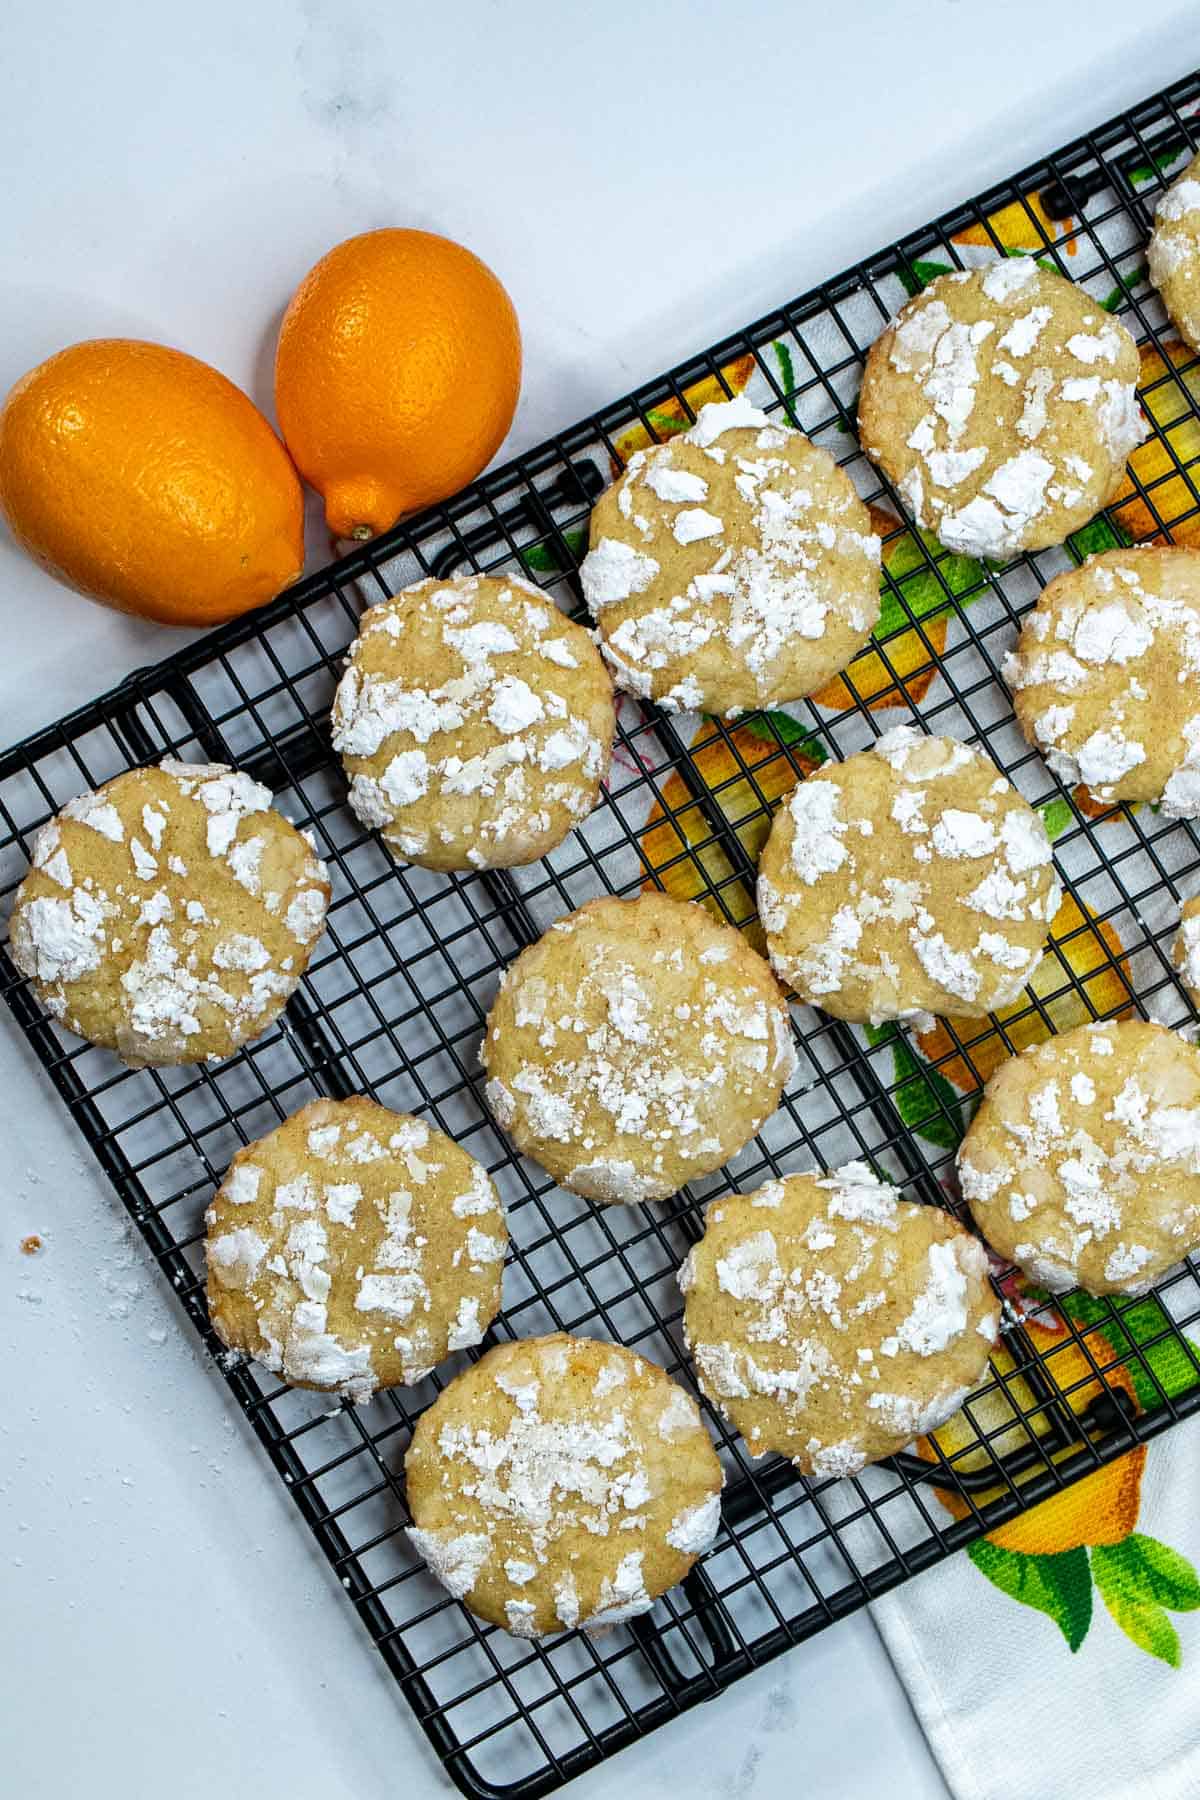 Meyer lemon cookies on a cooling rack with two Meyer lemons next to it.